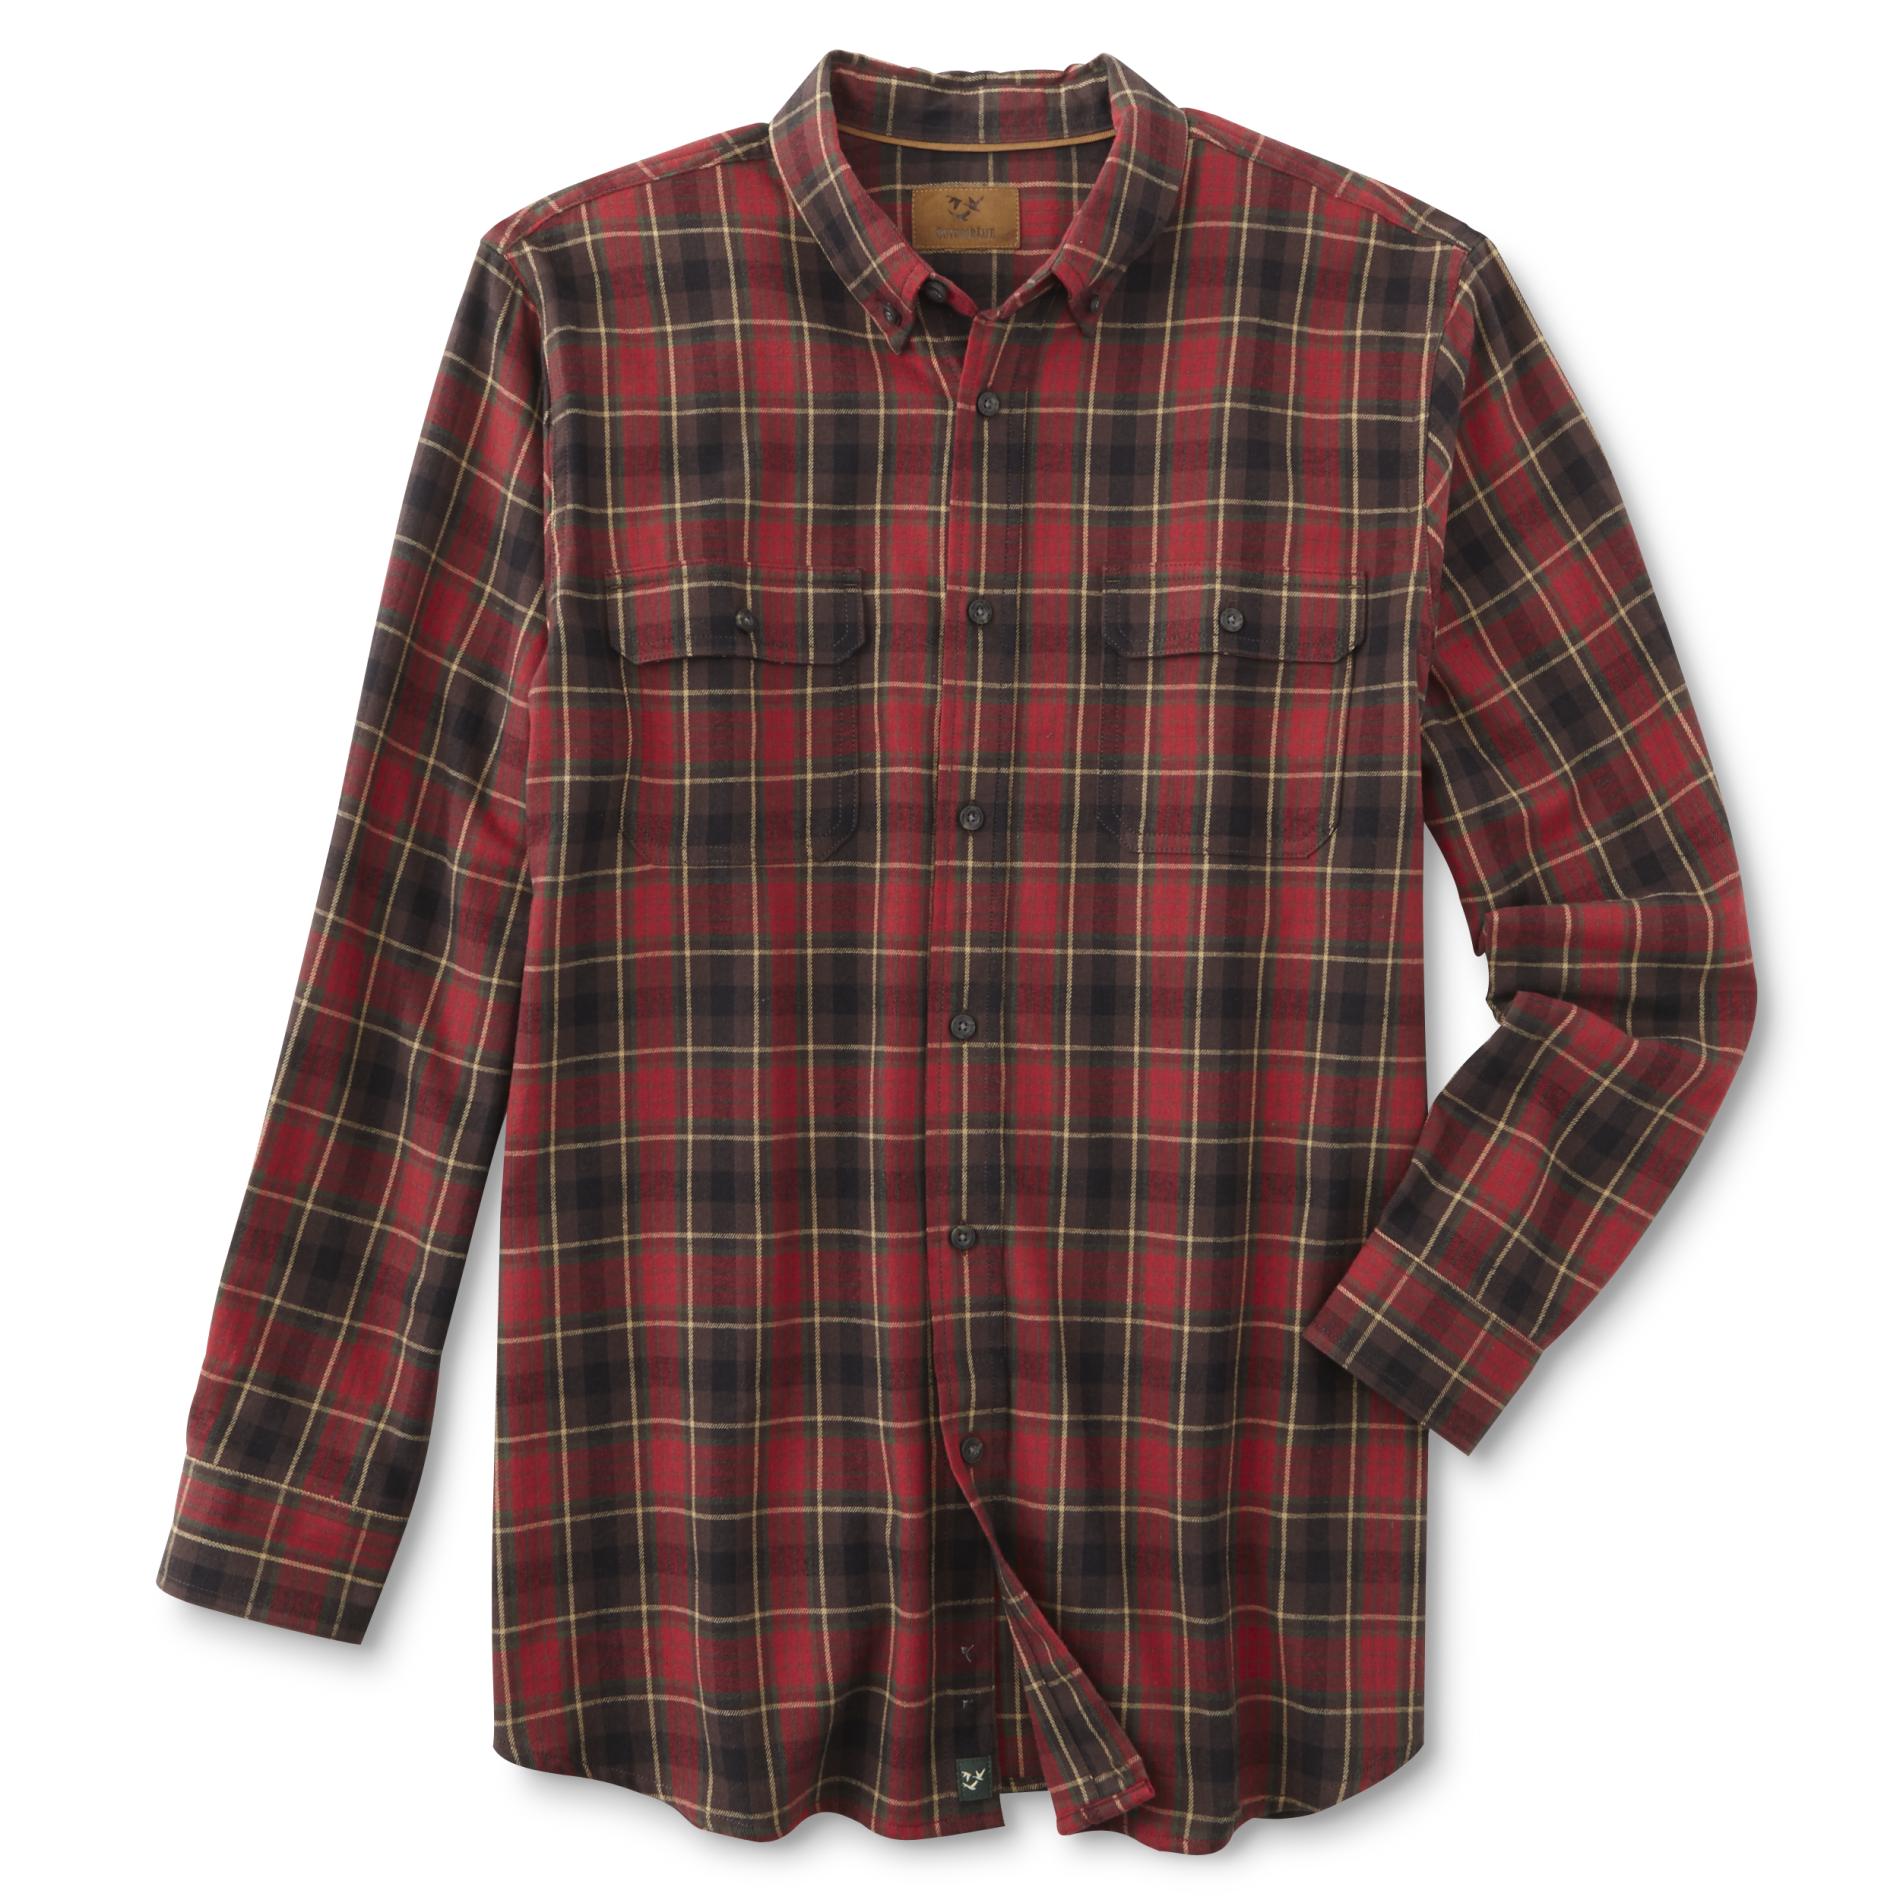 Outdoor Life Men's Big & Tall Flannel Shirt - Plaid | Shop Your Way ...